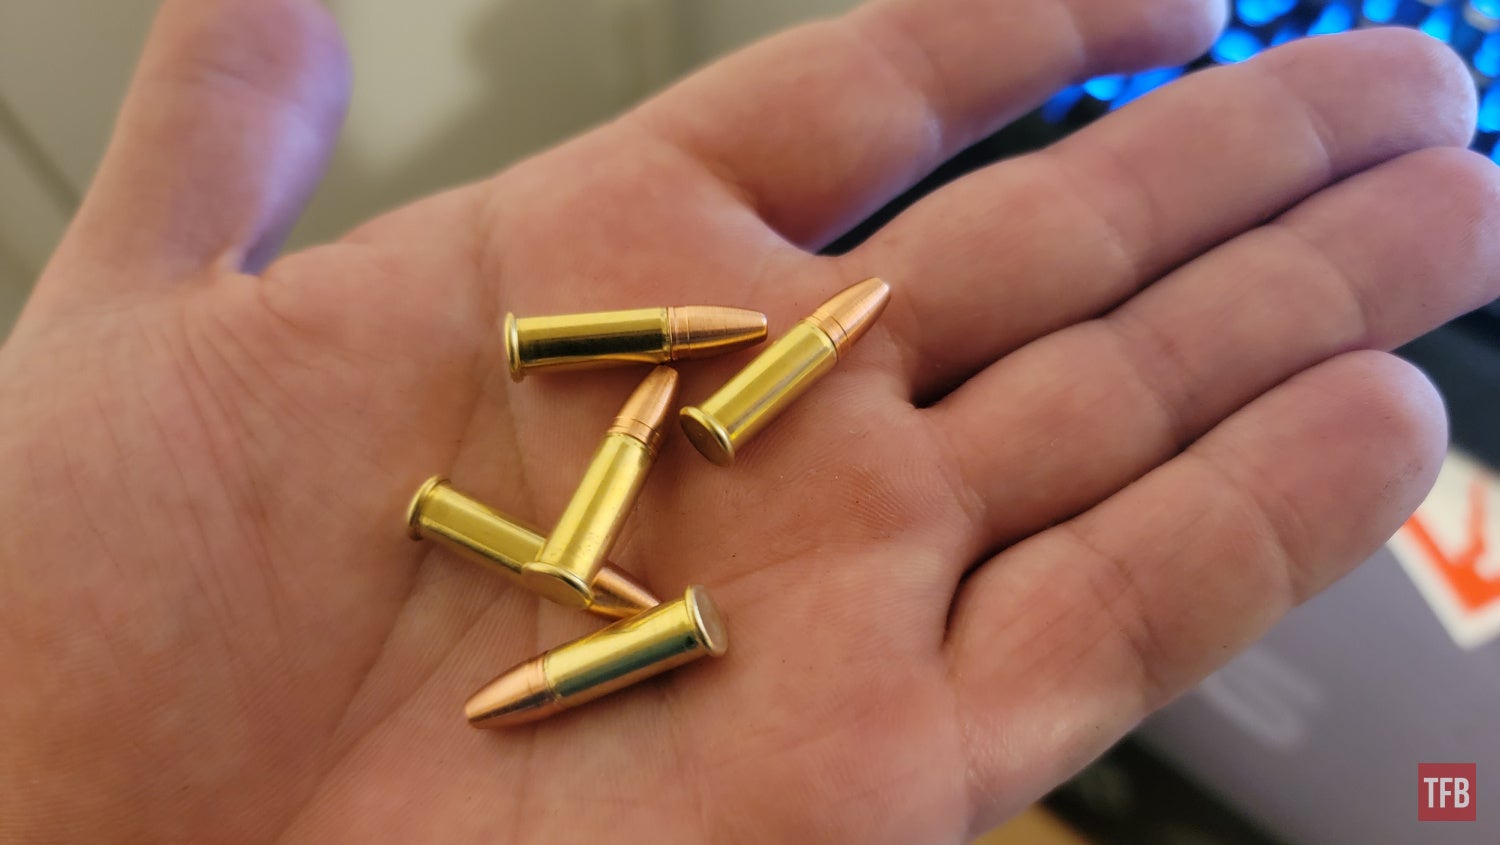 The Rimfire Report: Reloading with Cutting Edge Bullets 22LR Kit